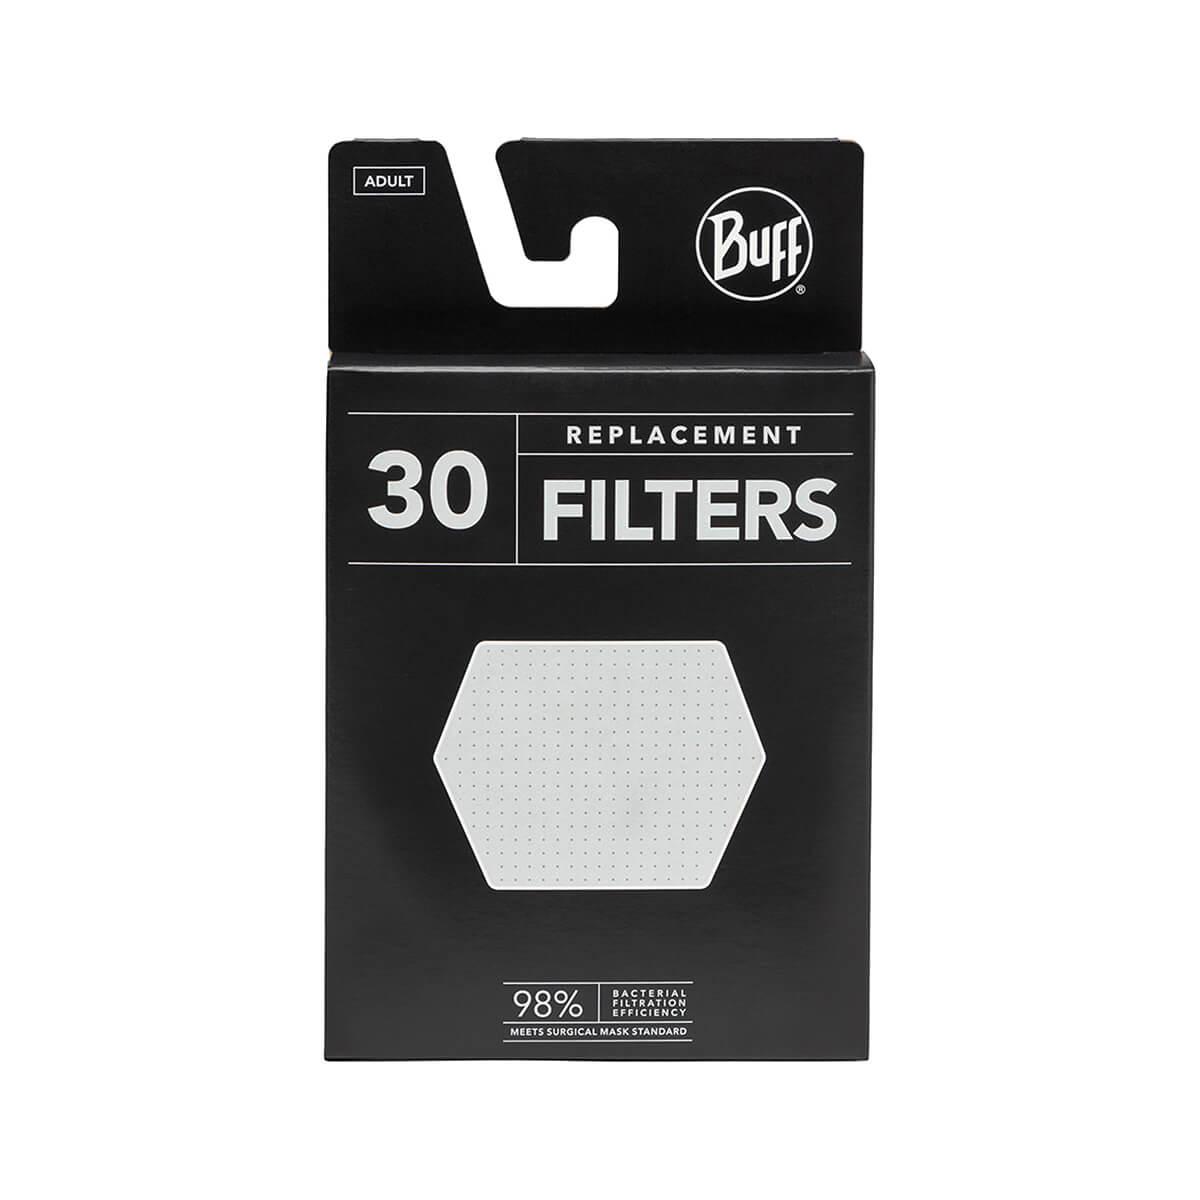  Adult Replacement Filters - 30 Pack